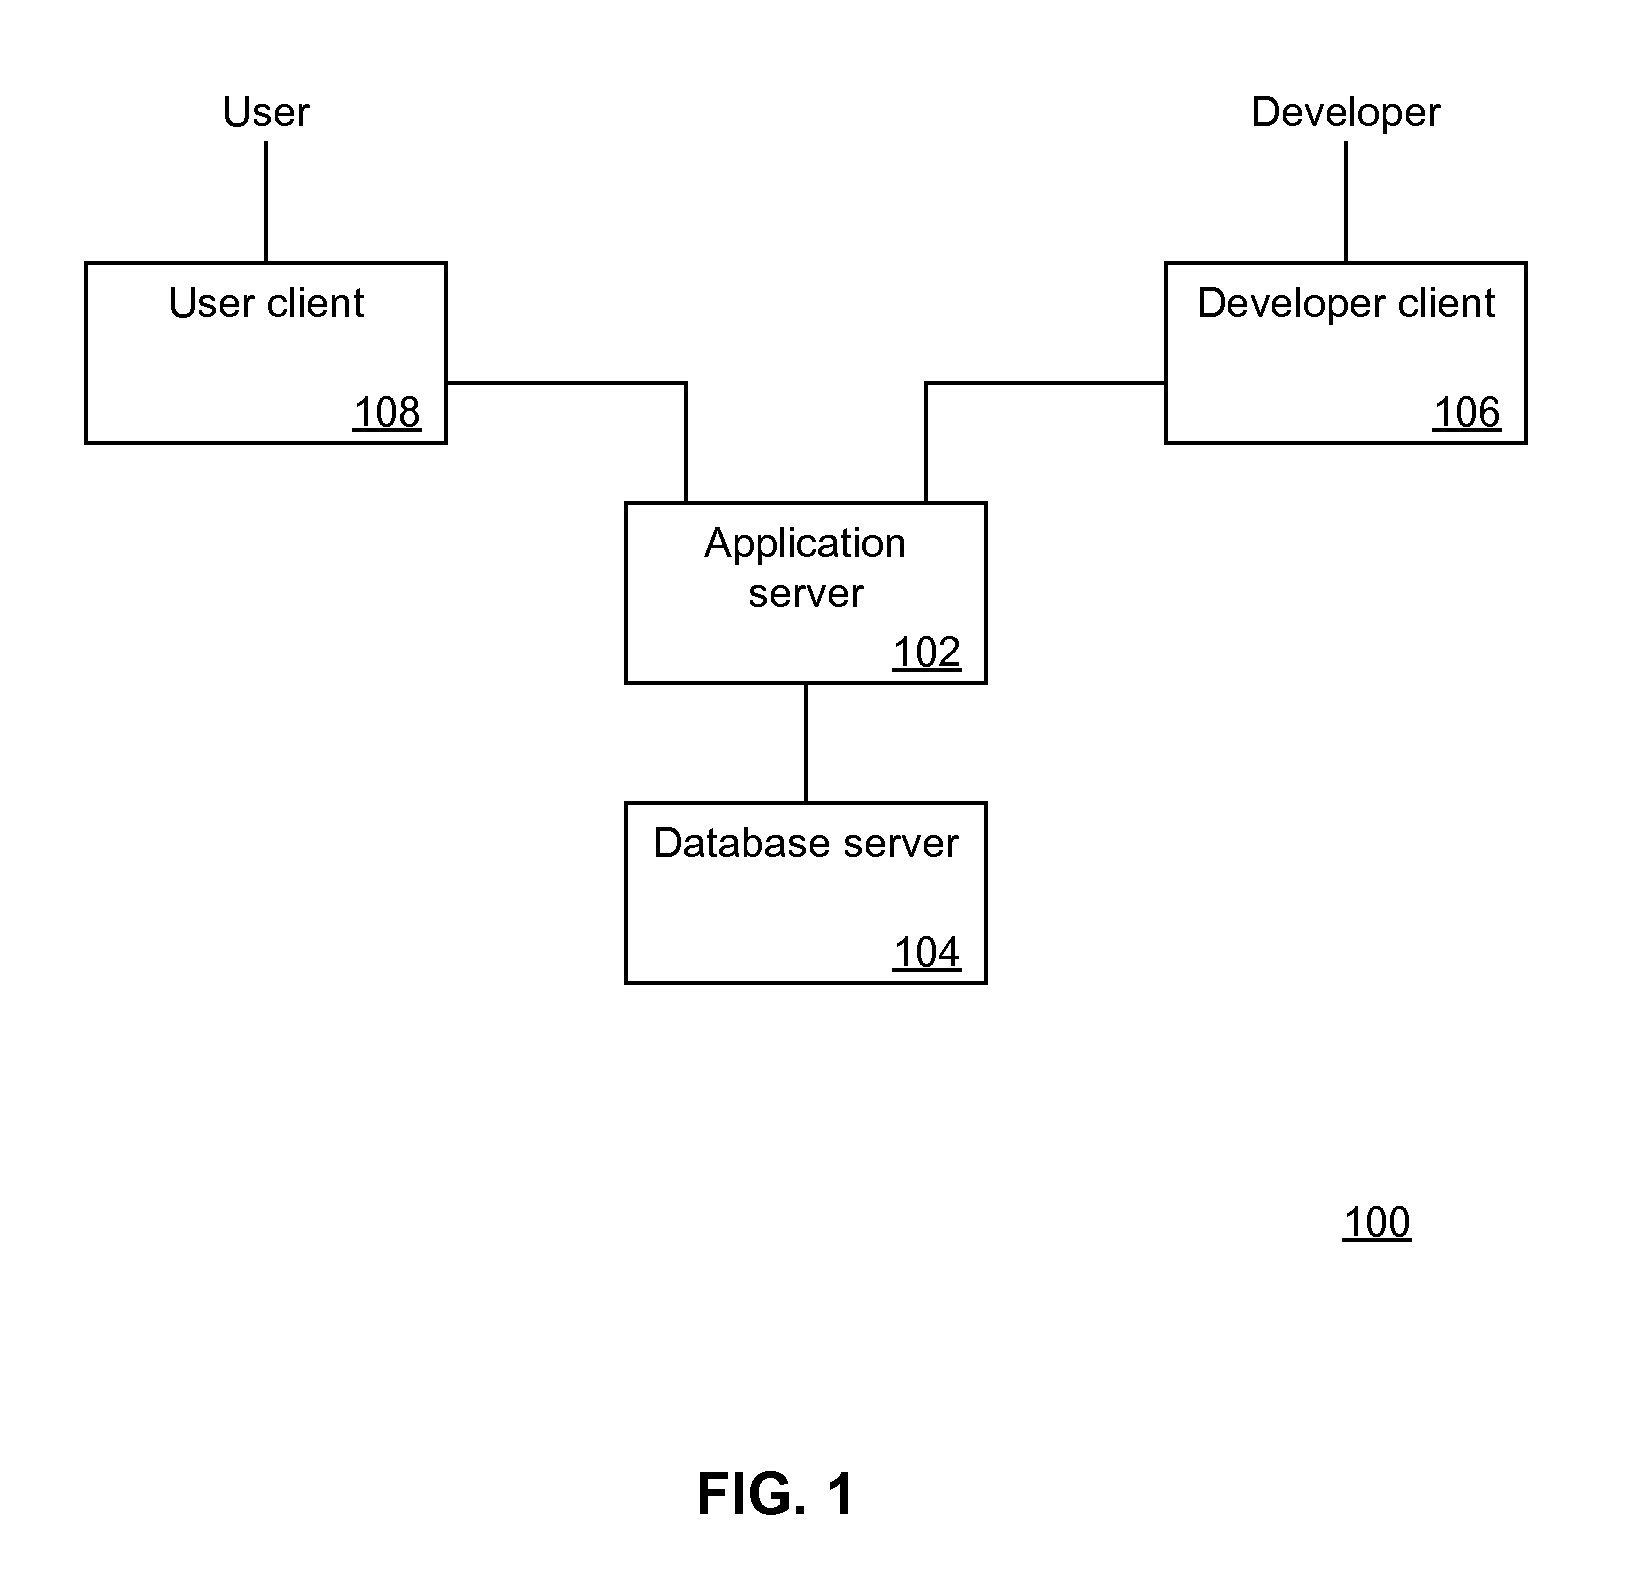 System and Method of Error Handling in a Platform as a Service Environment